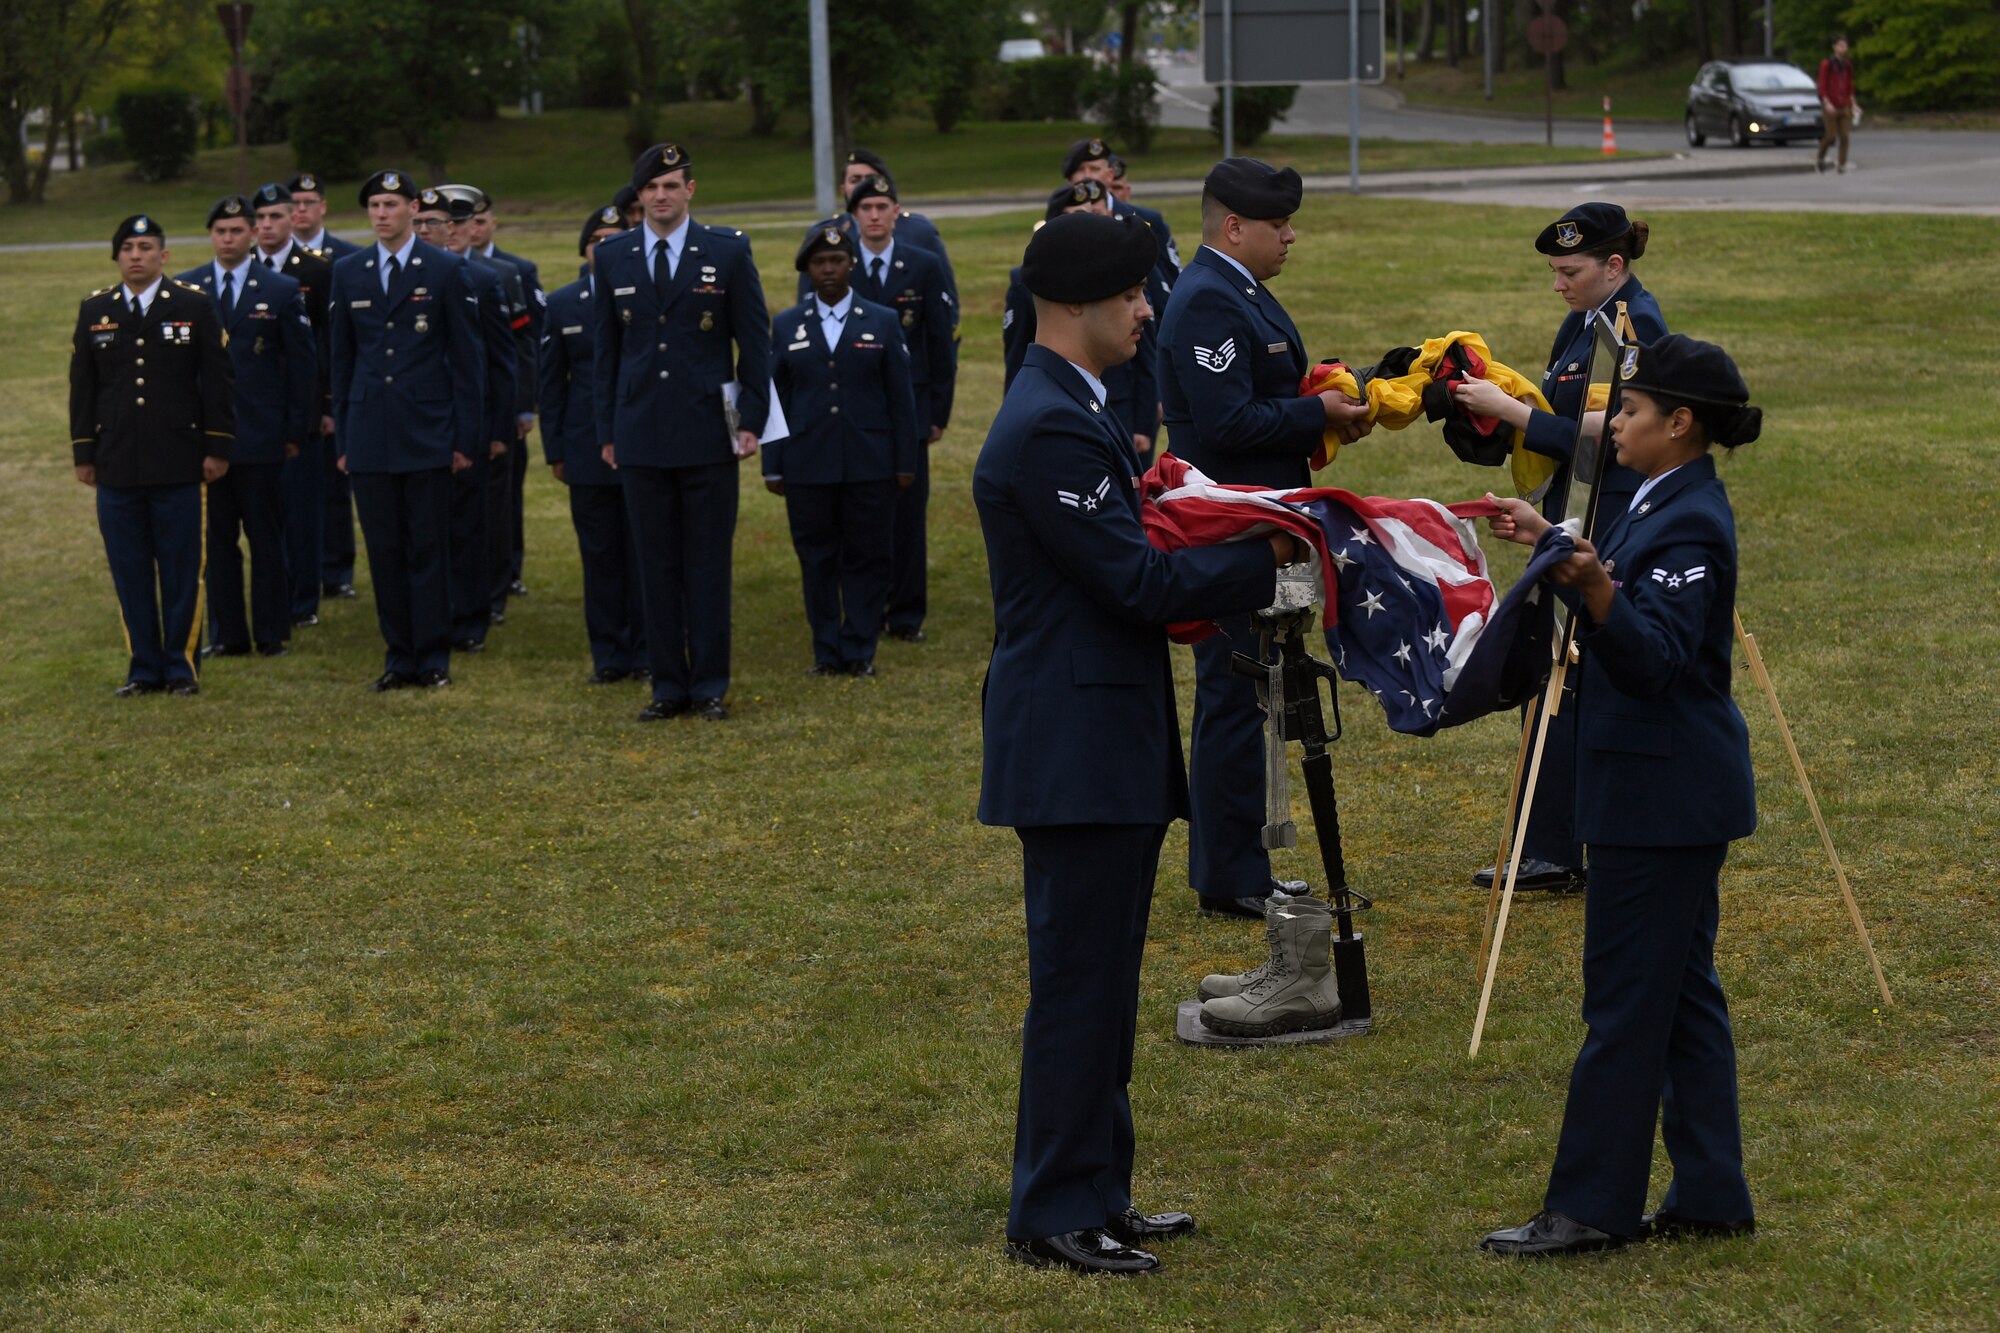 U.S. Airmen fold an American and German flag in recognition of fallen U.S. armed forces police services members during the Police Week 2019 retreat ceremony on Vogelweh Military Complex, Germany, May 17, 2019.